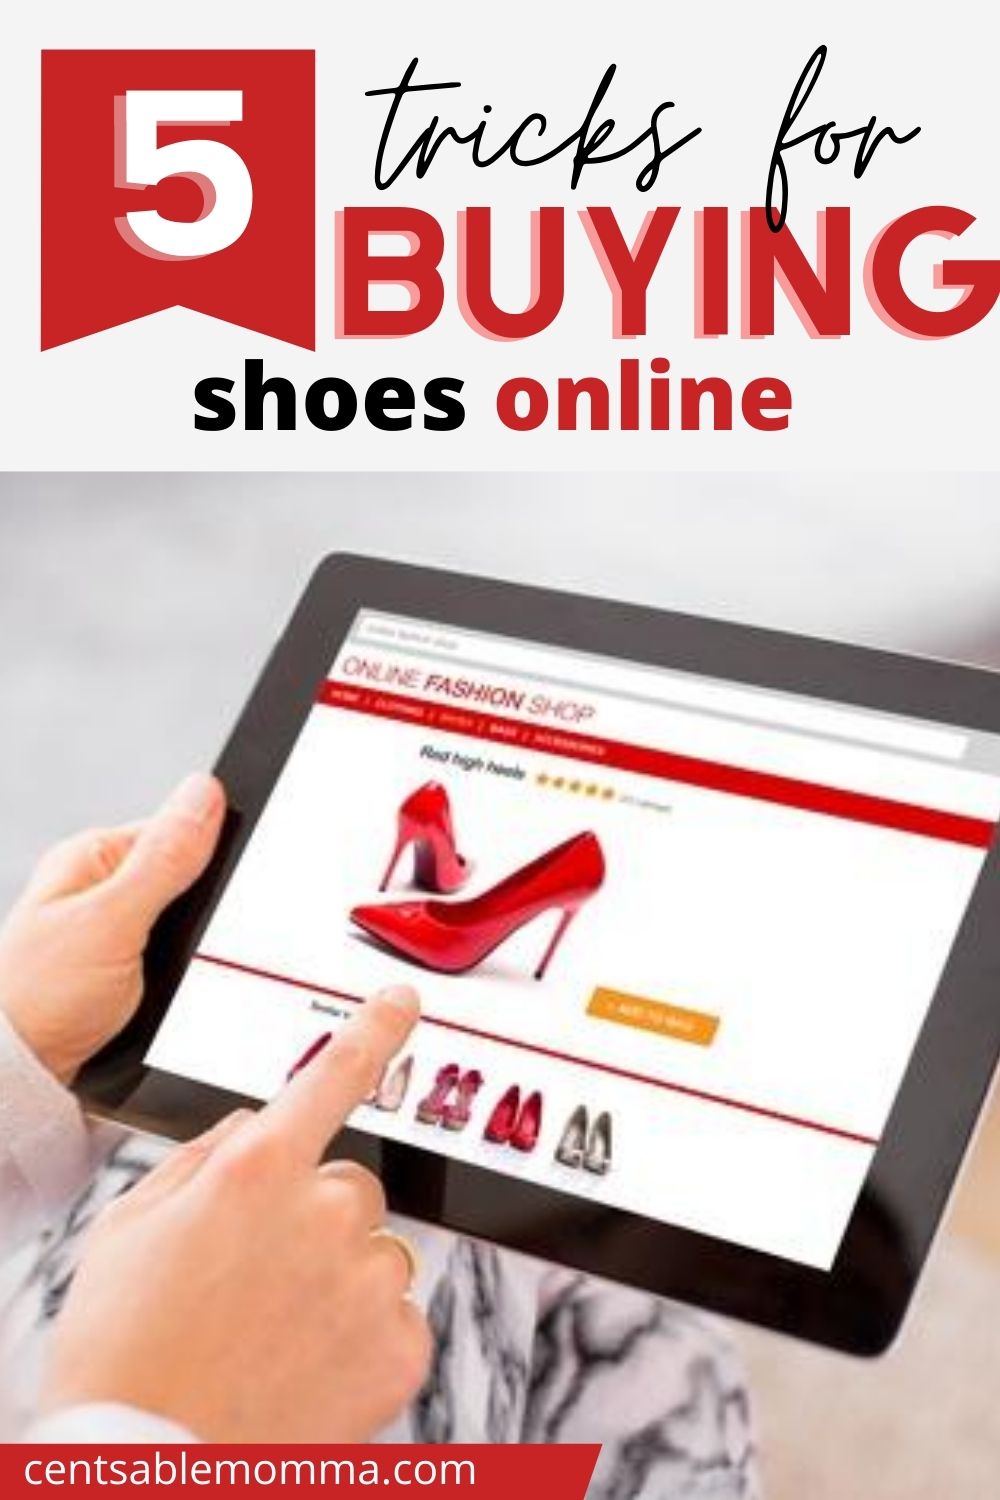 shopping for red high heels online with a tablet